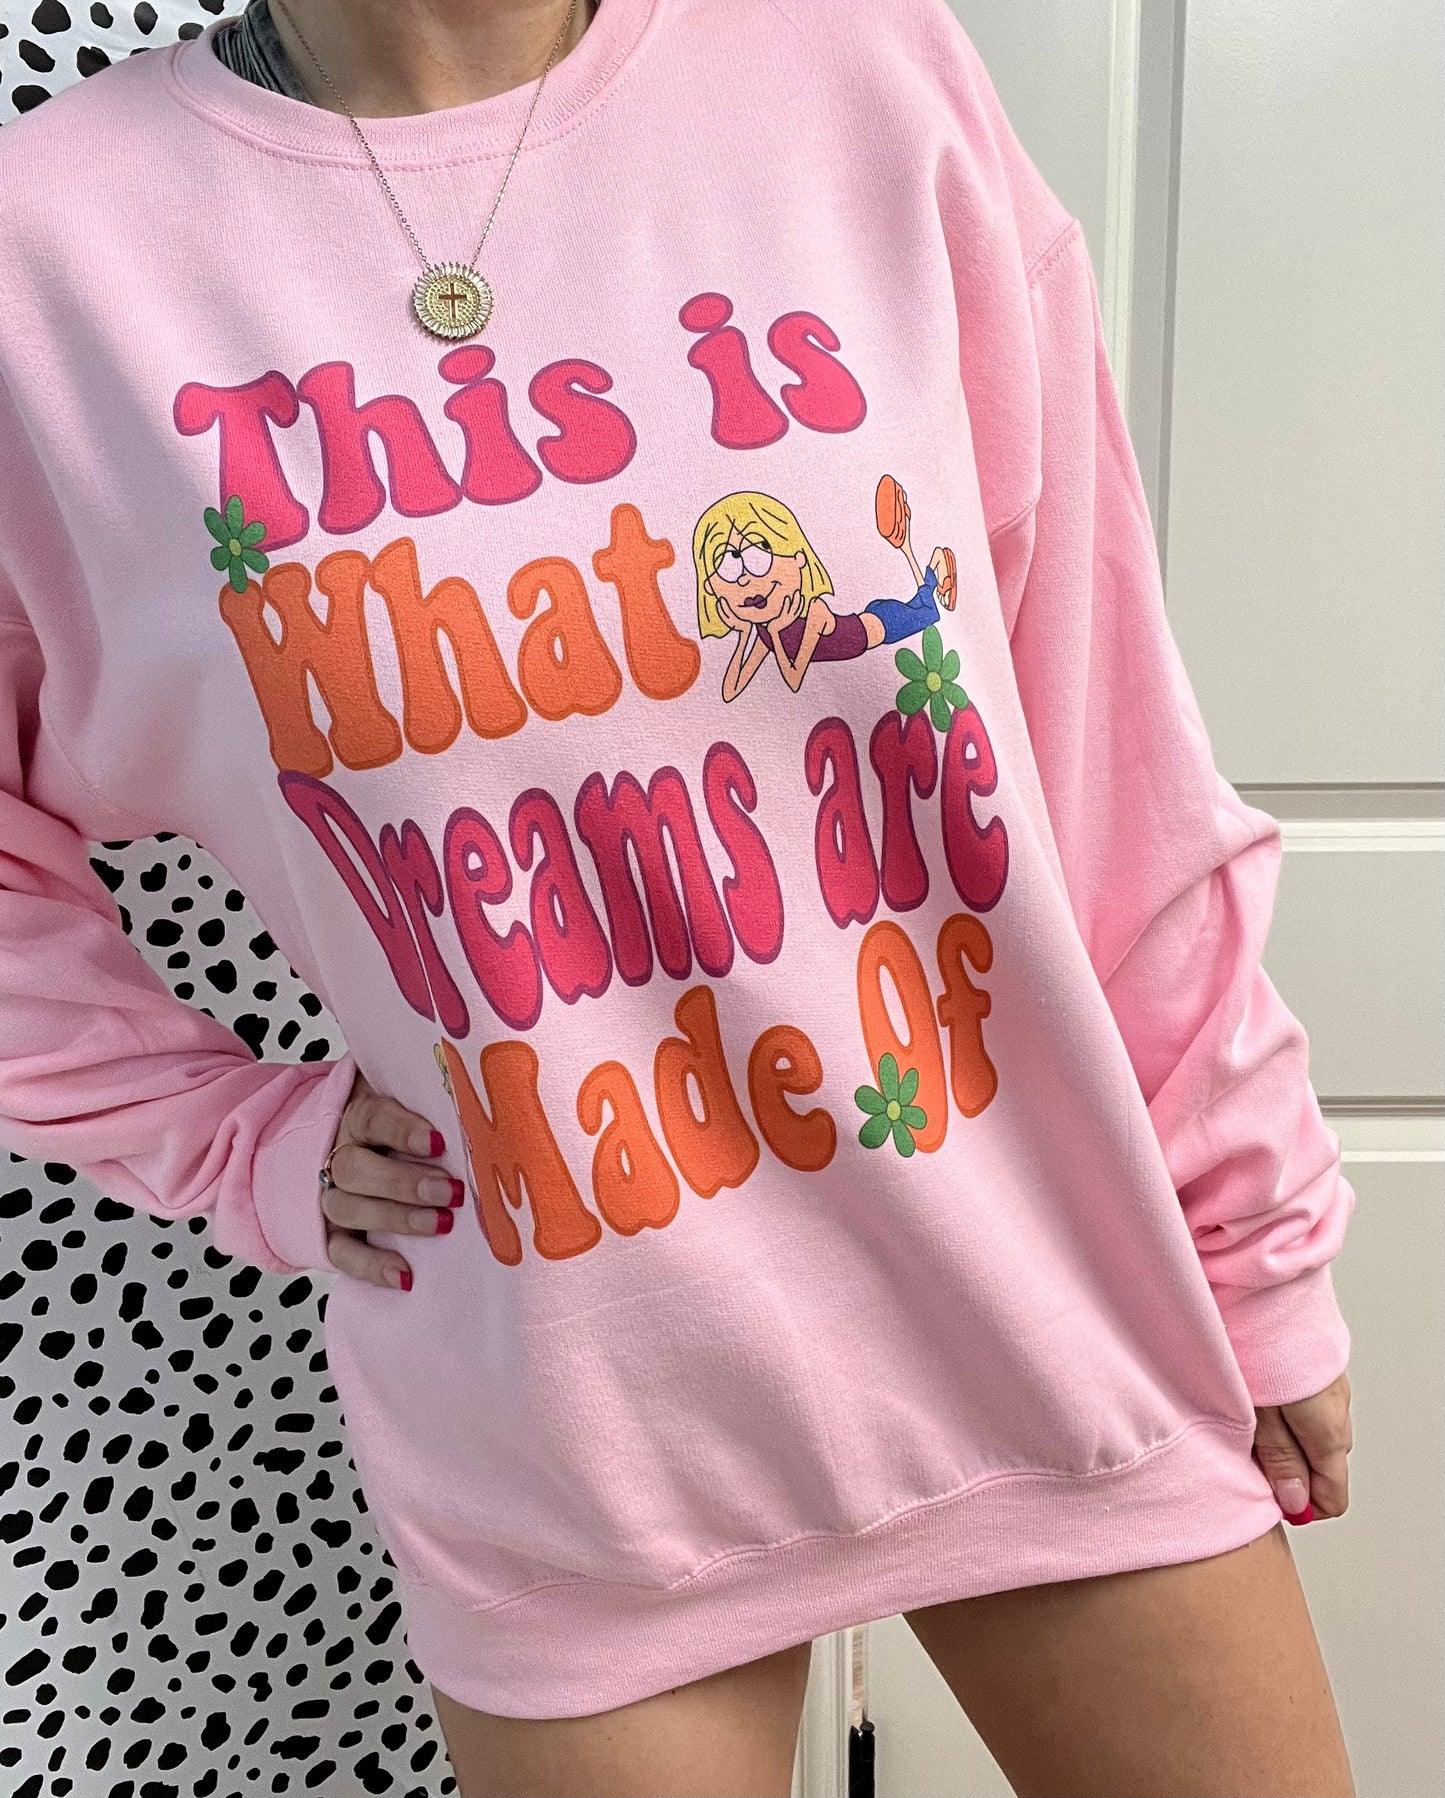 Groovy Vibes | What Dreams are made of Sweatshirt